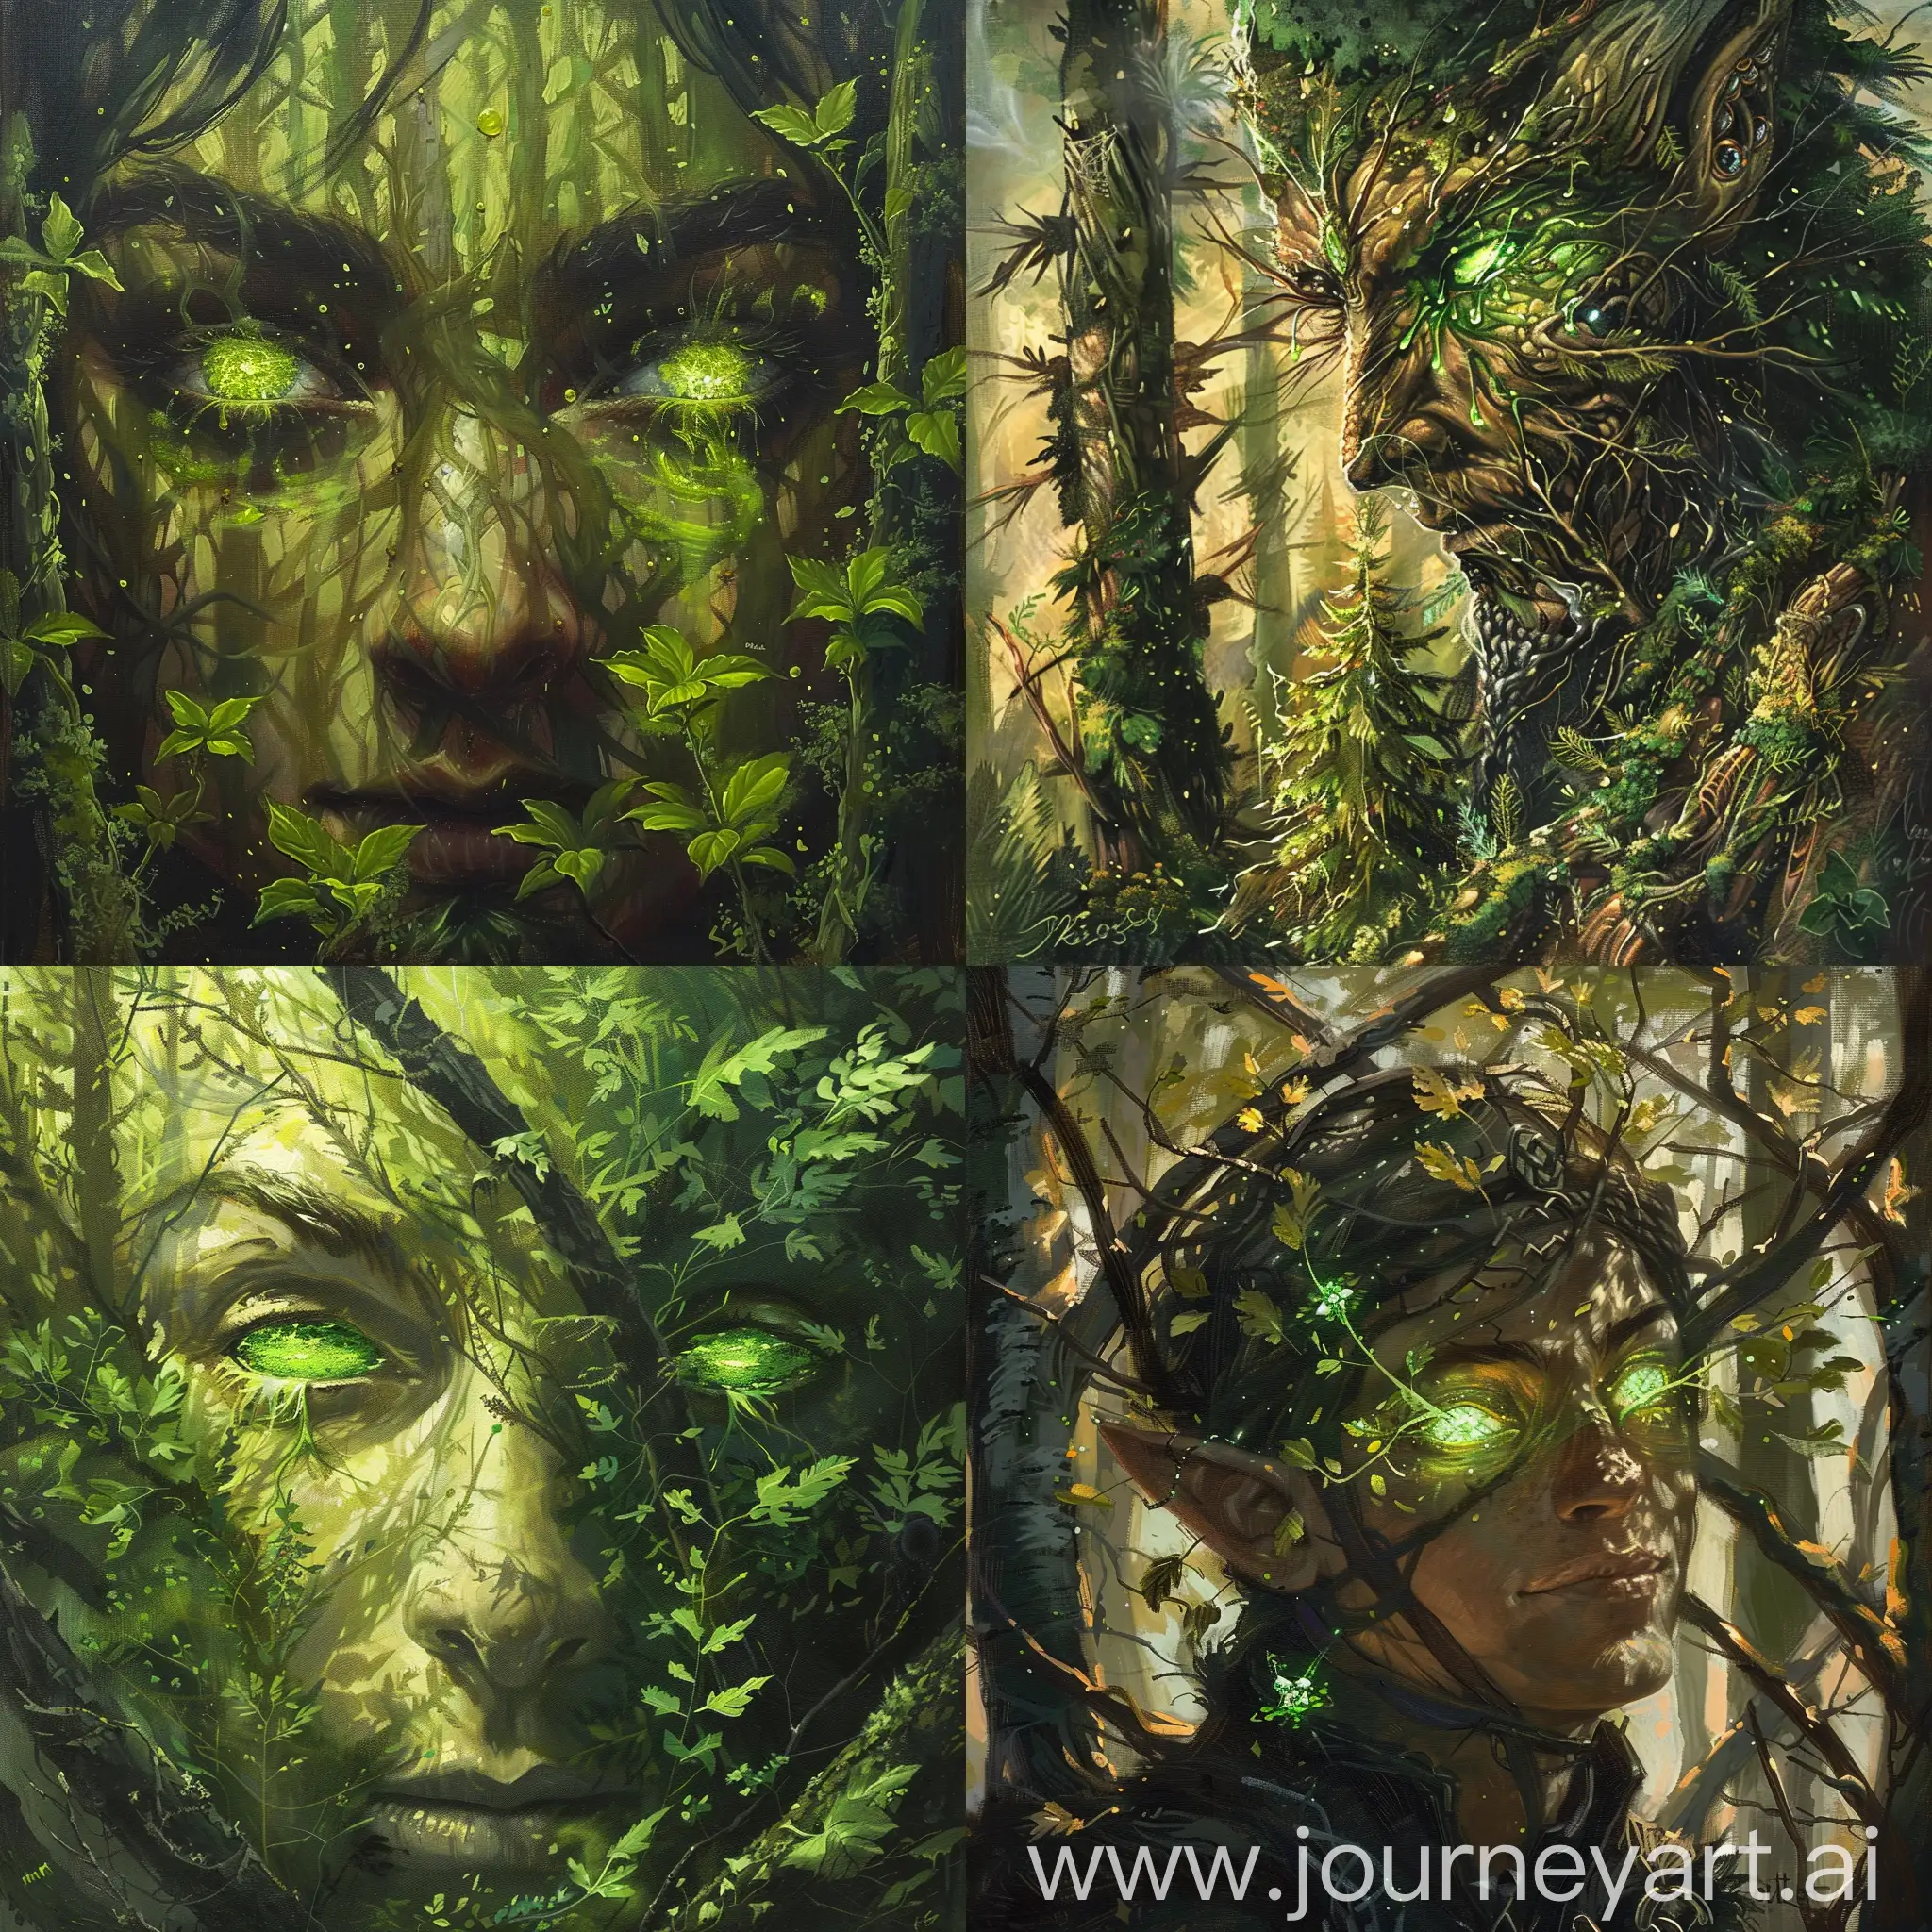 Druid of the forest. eyes glowing green with nature magic. sprouting trees in a forrest using nature magic..
In the art style of Terese Nielsen oil painting.